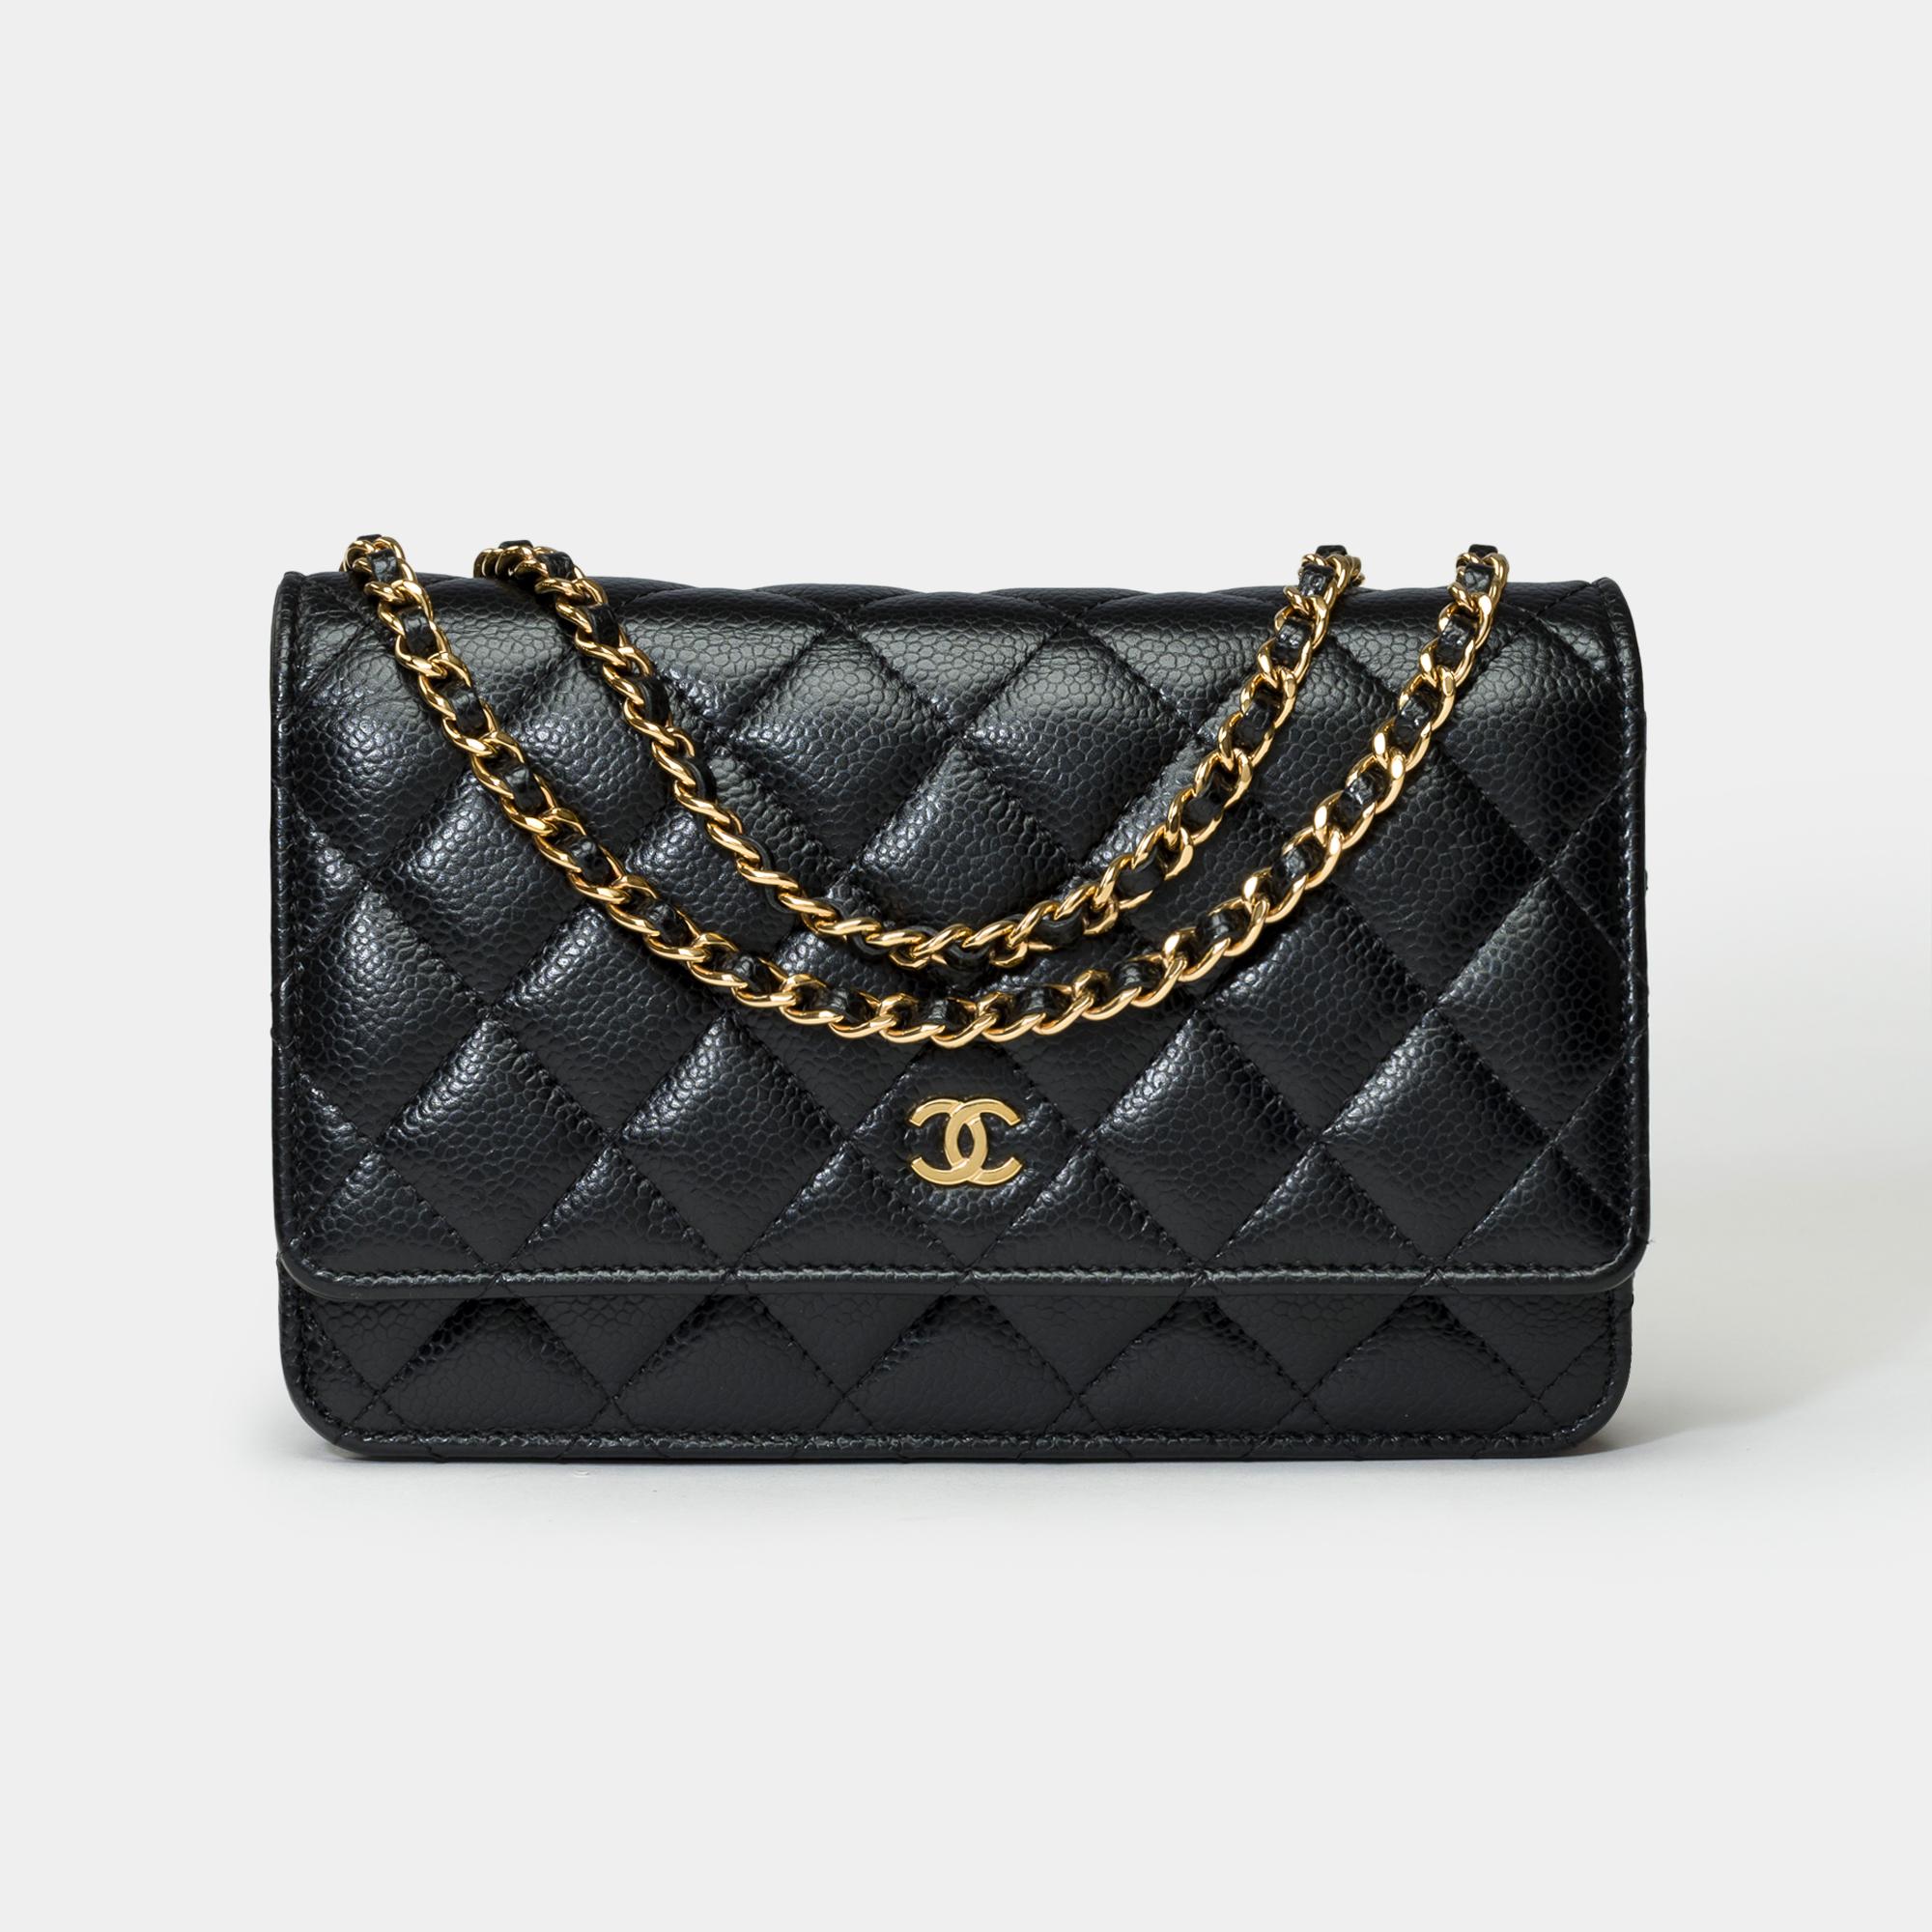 Superb Chanel Wallet On Chain (WOC) shoulder bag in black caviar quilted leather, gold metal trim, a gold metal chain handle interlaced with black leather allowing a shoulder or crossbody carry

A patch pocket on the back of the bag
Closure by flap,